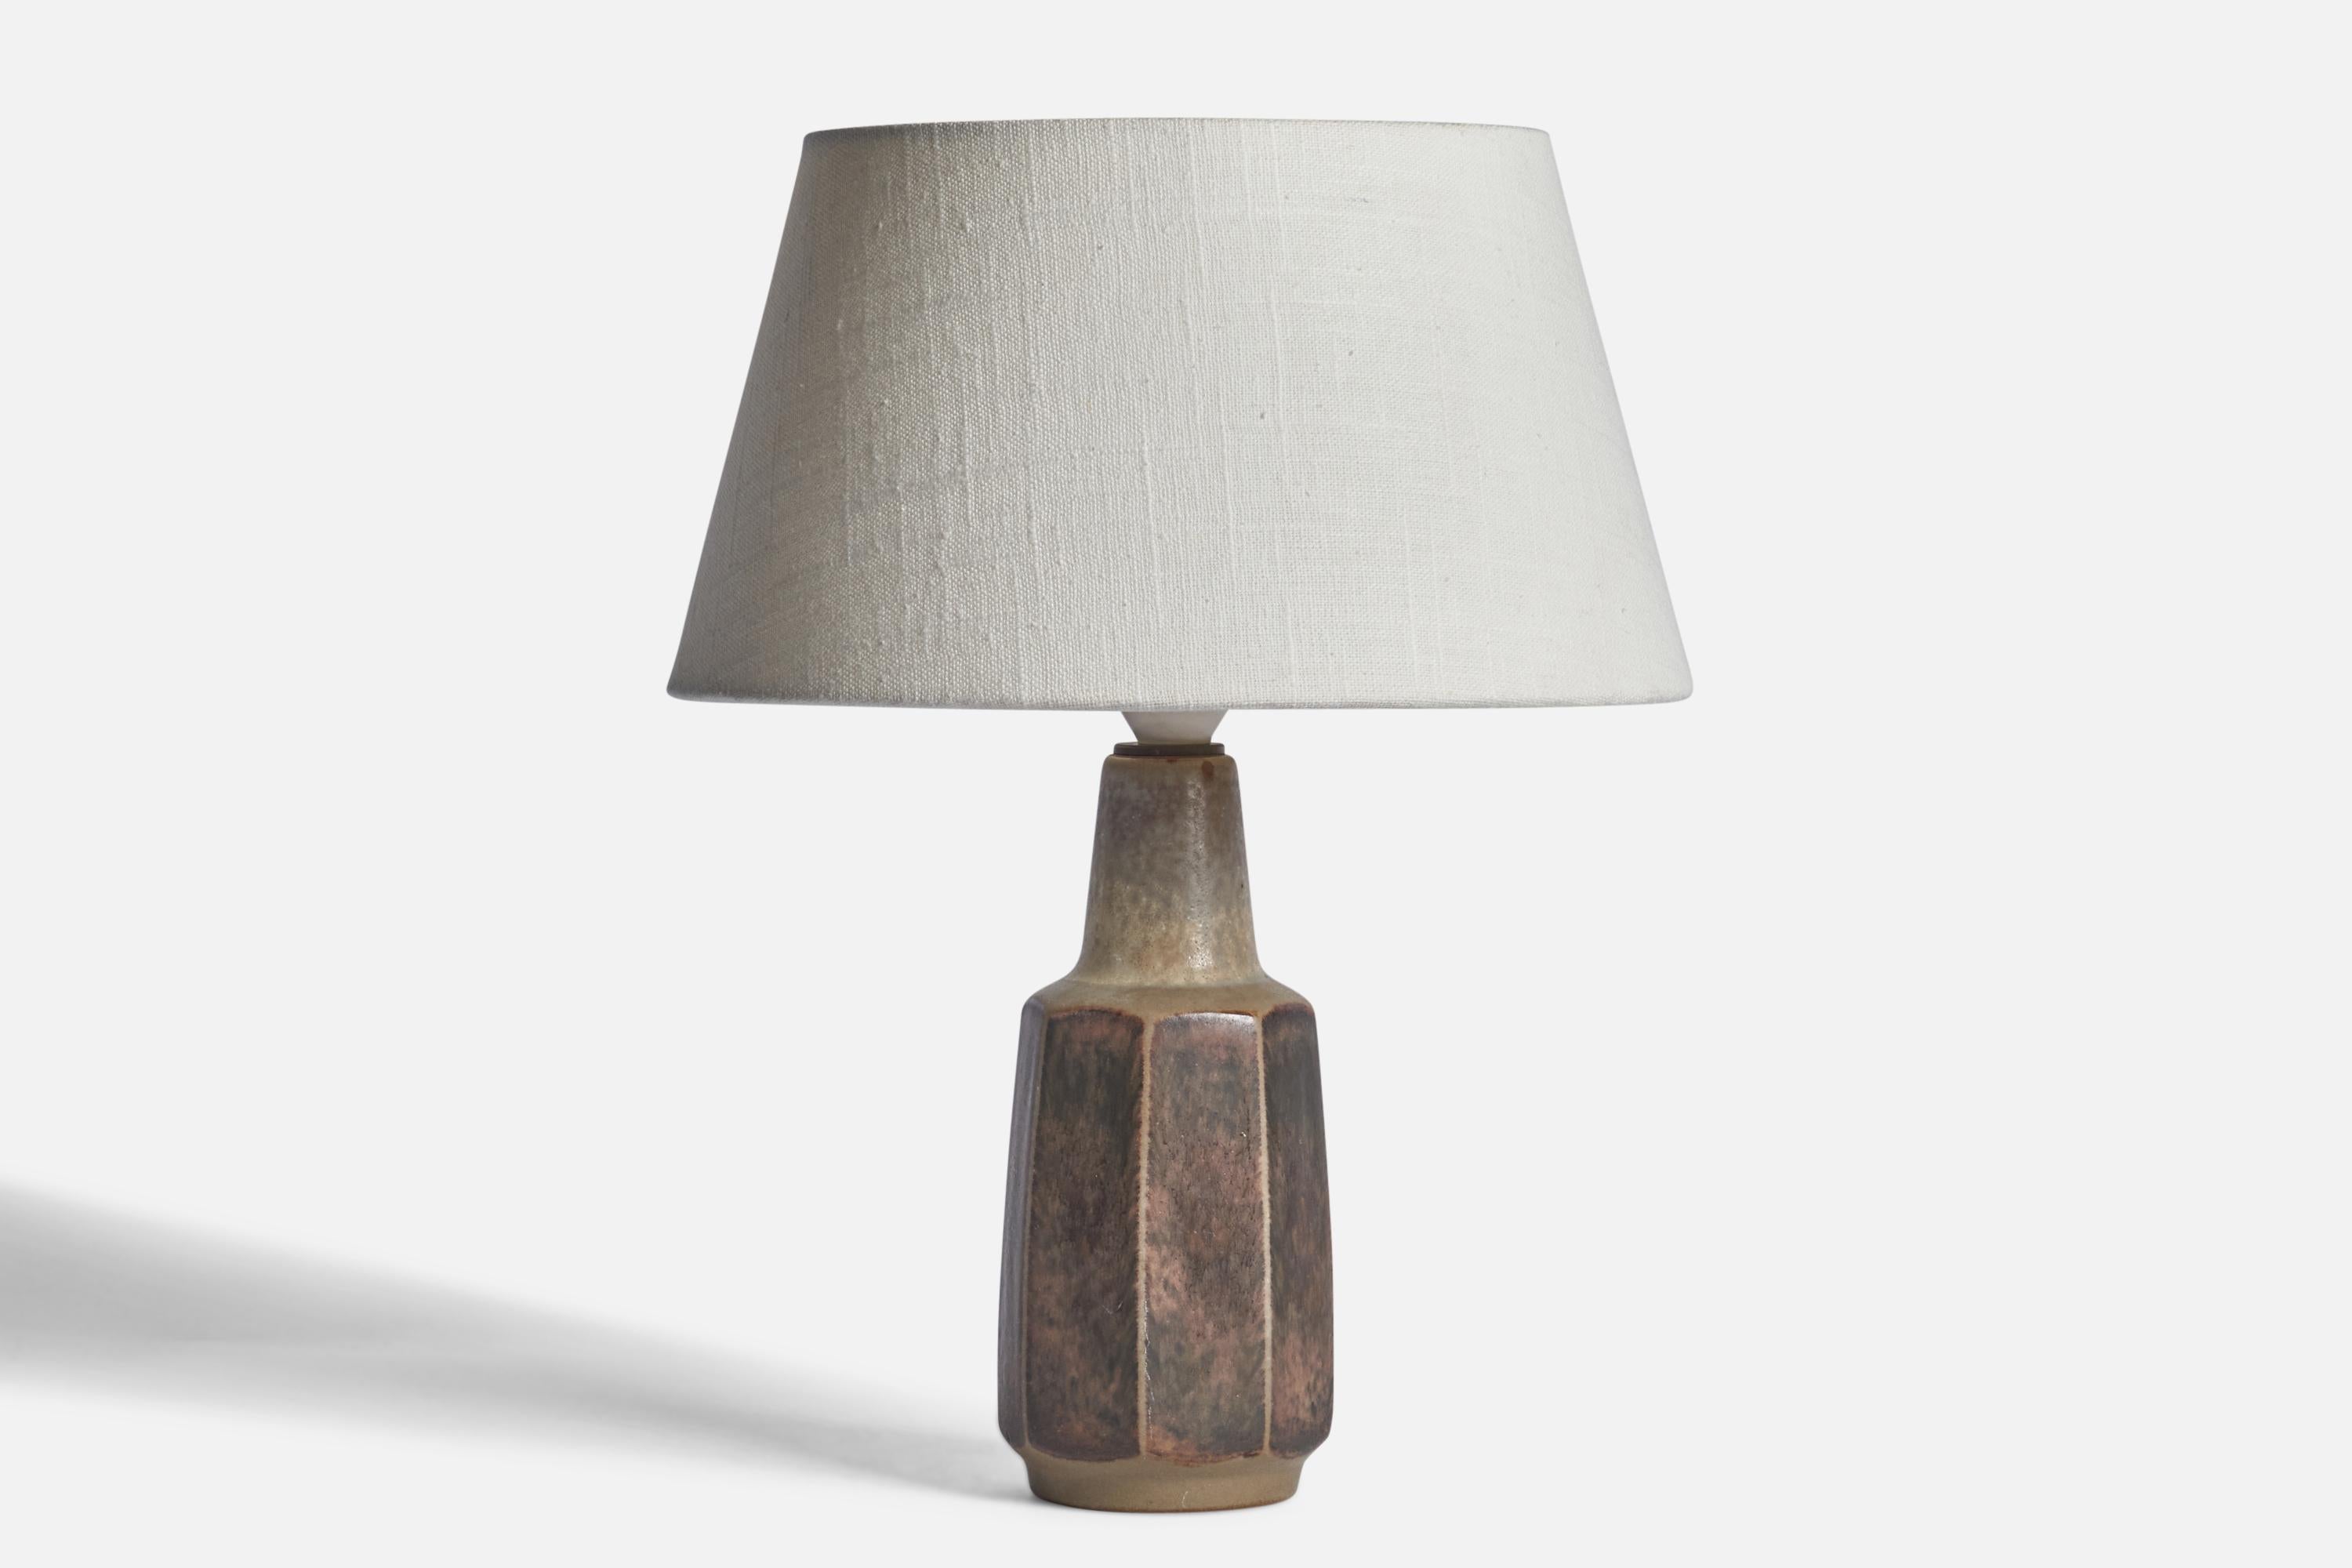 A grey-glazed stoneware table lamp designed by Marianne Starck and produced by Michael Andersen, Bornholm, Denmark, 1960s.

Dimensions of Lamp (inches): 10.5